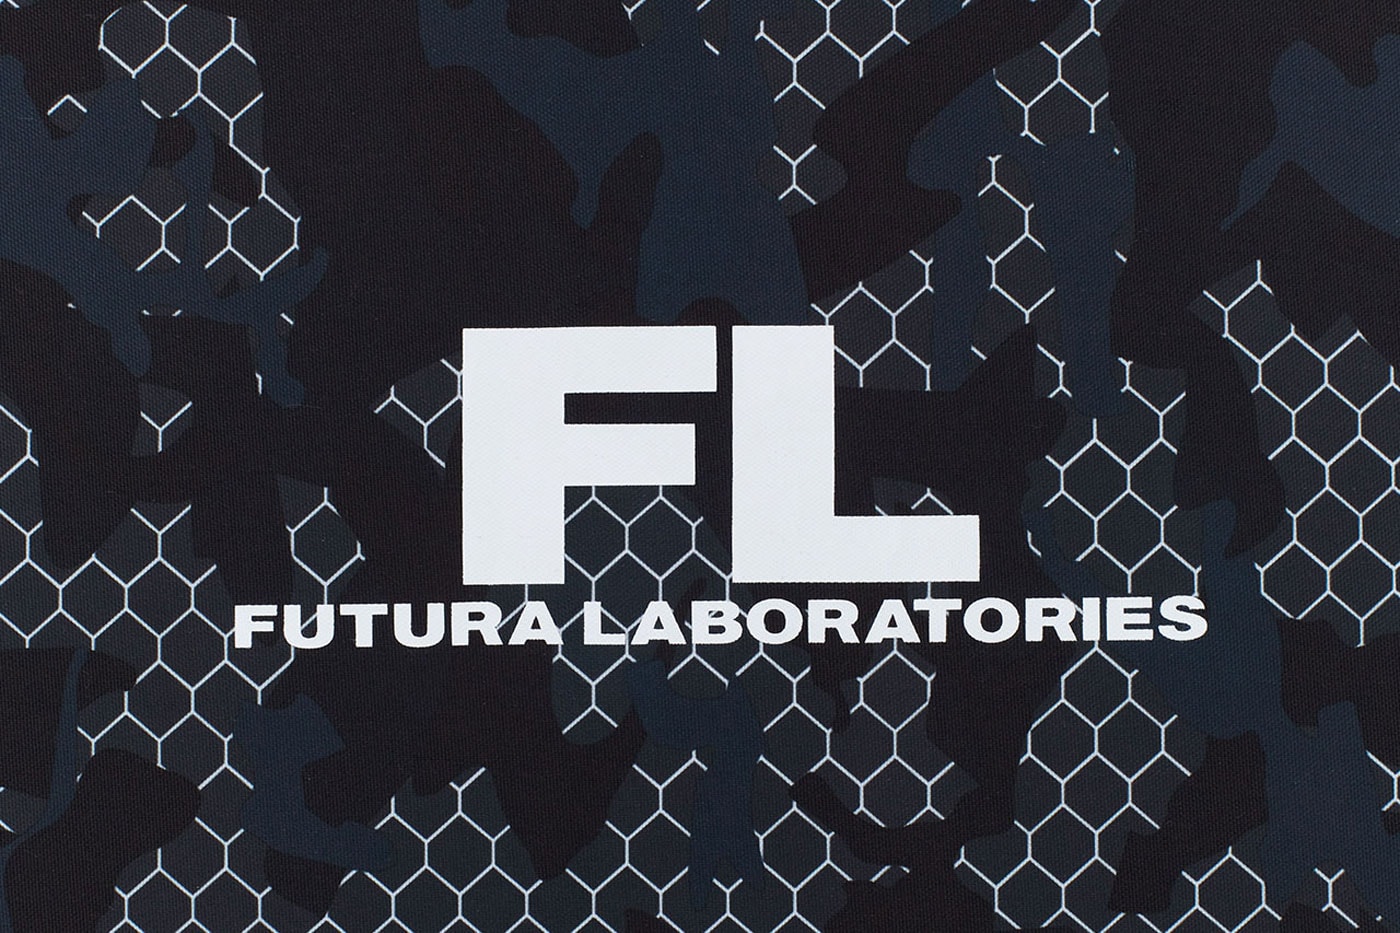 neighborhood futura laboratories collaboration collection pointman incense chamber gore tex infinium marmot pullover hoodie t shirt dad cap ma-1 chair camo e cot e hanger ep field office sk8thing ce release info